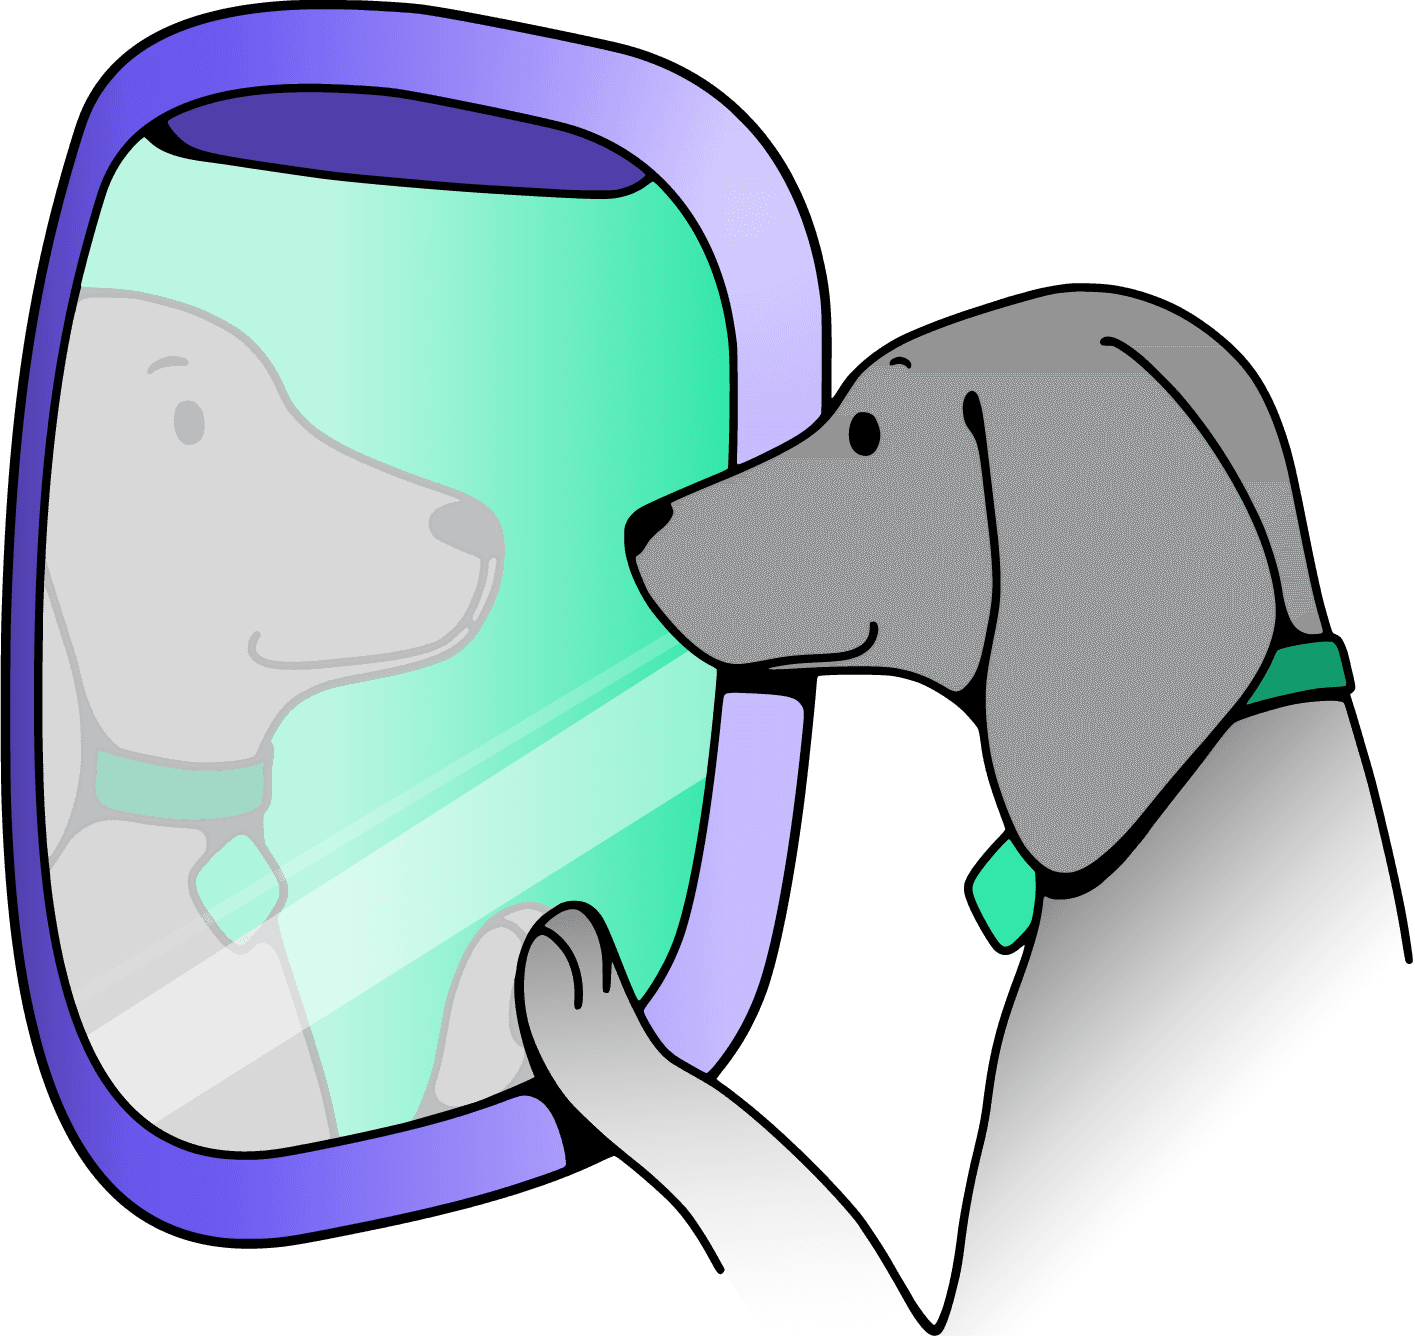 Pointer dog looking out an airplane window